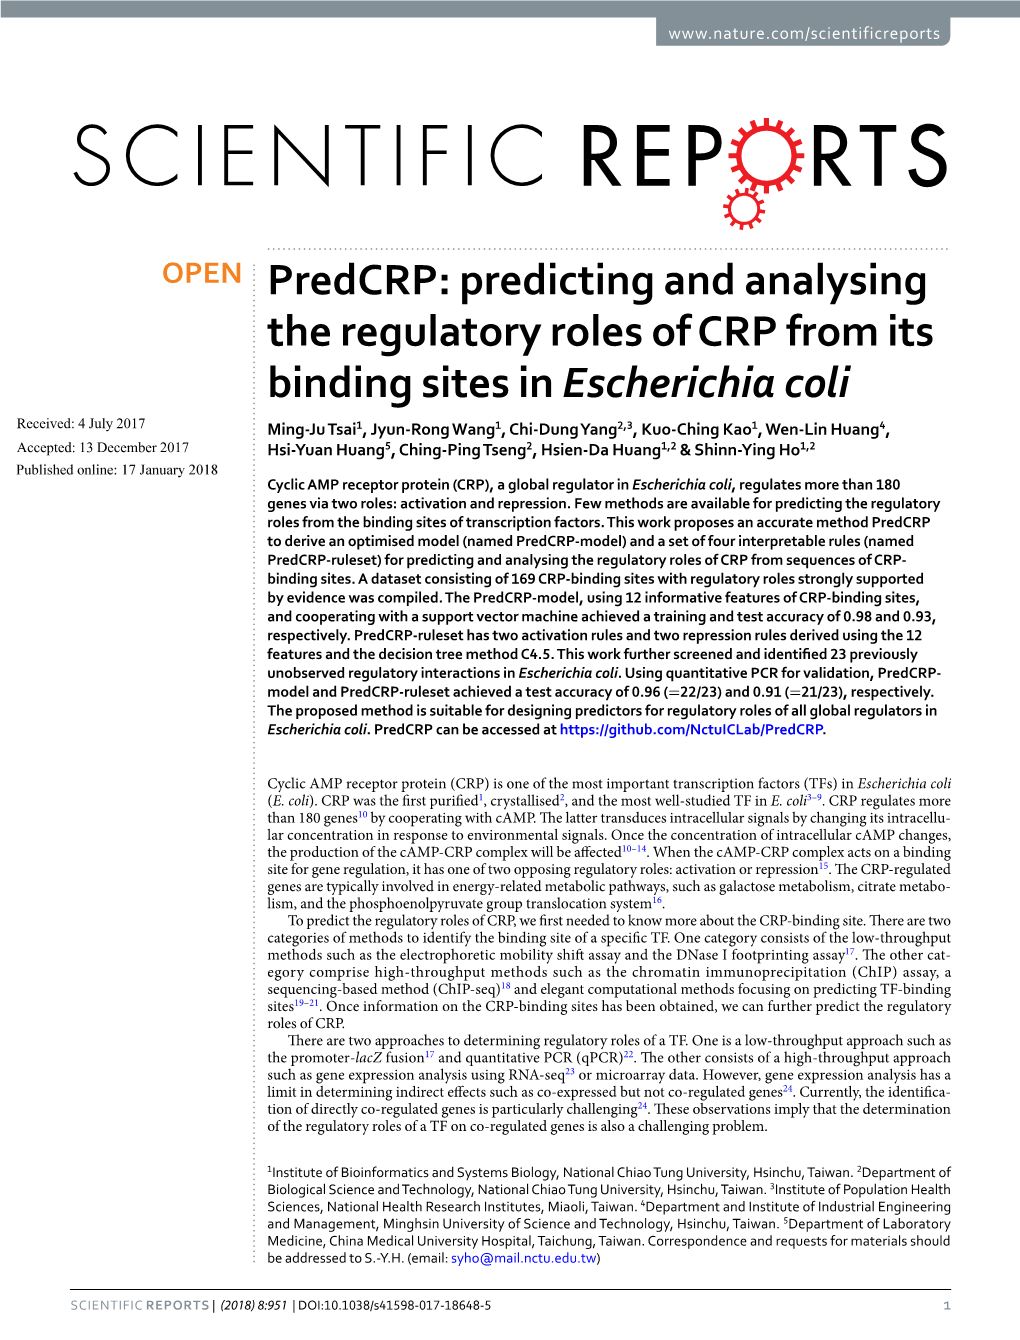 Predcrp: Predicting and Analysing the Regulatory Roles of CRP from Its